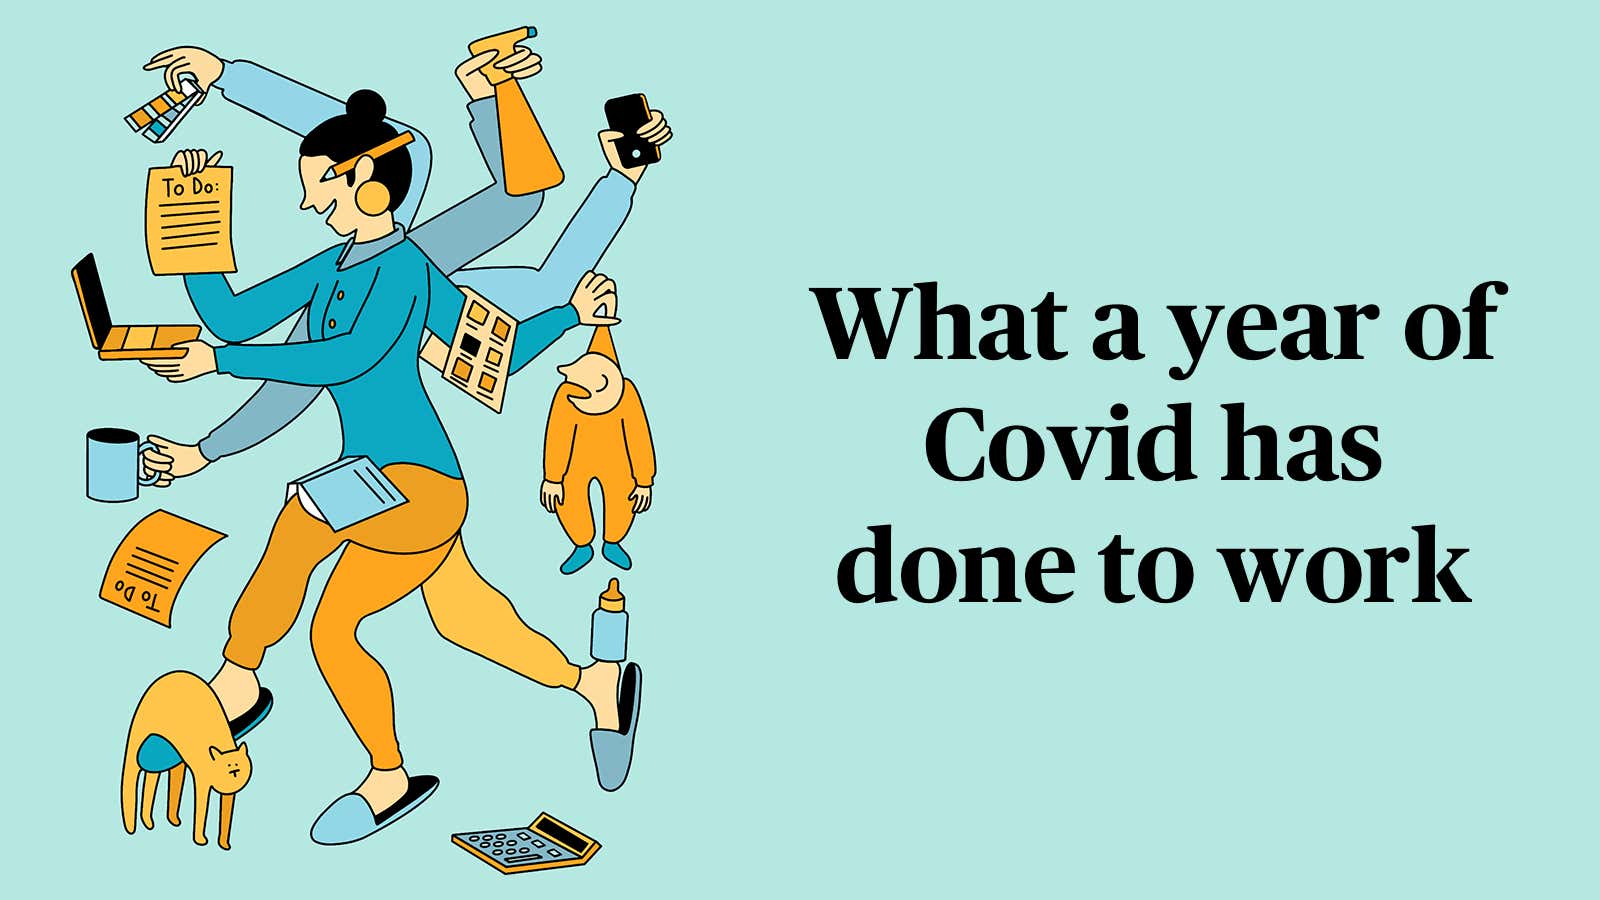 For members—What a year of Covid has done to work